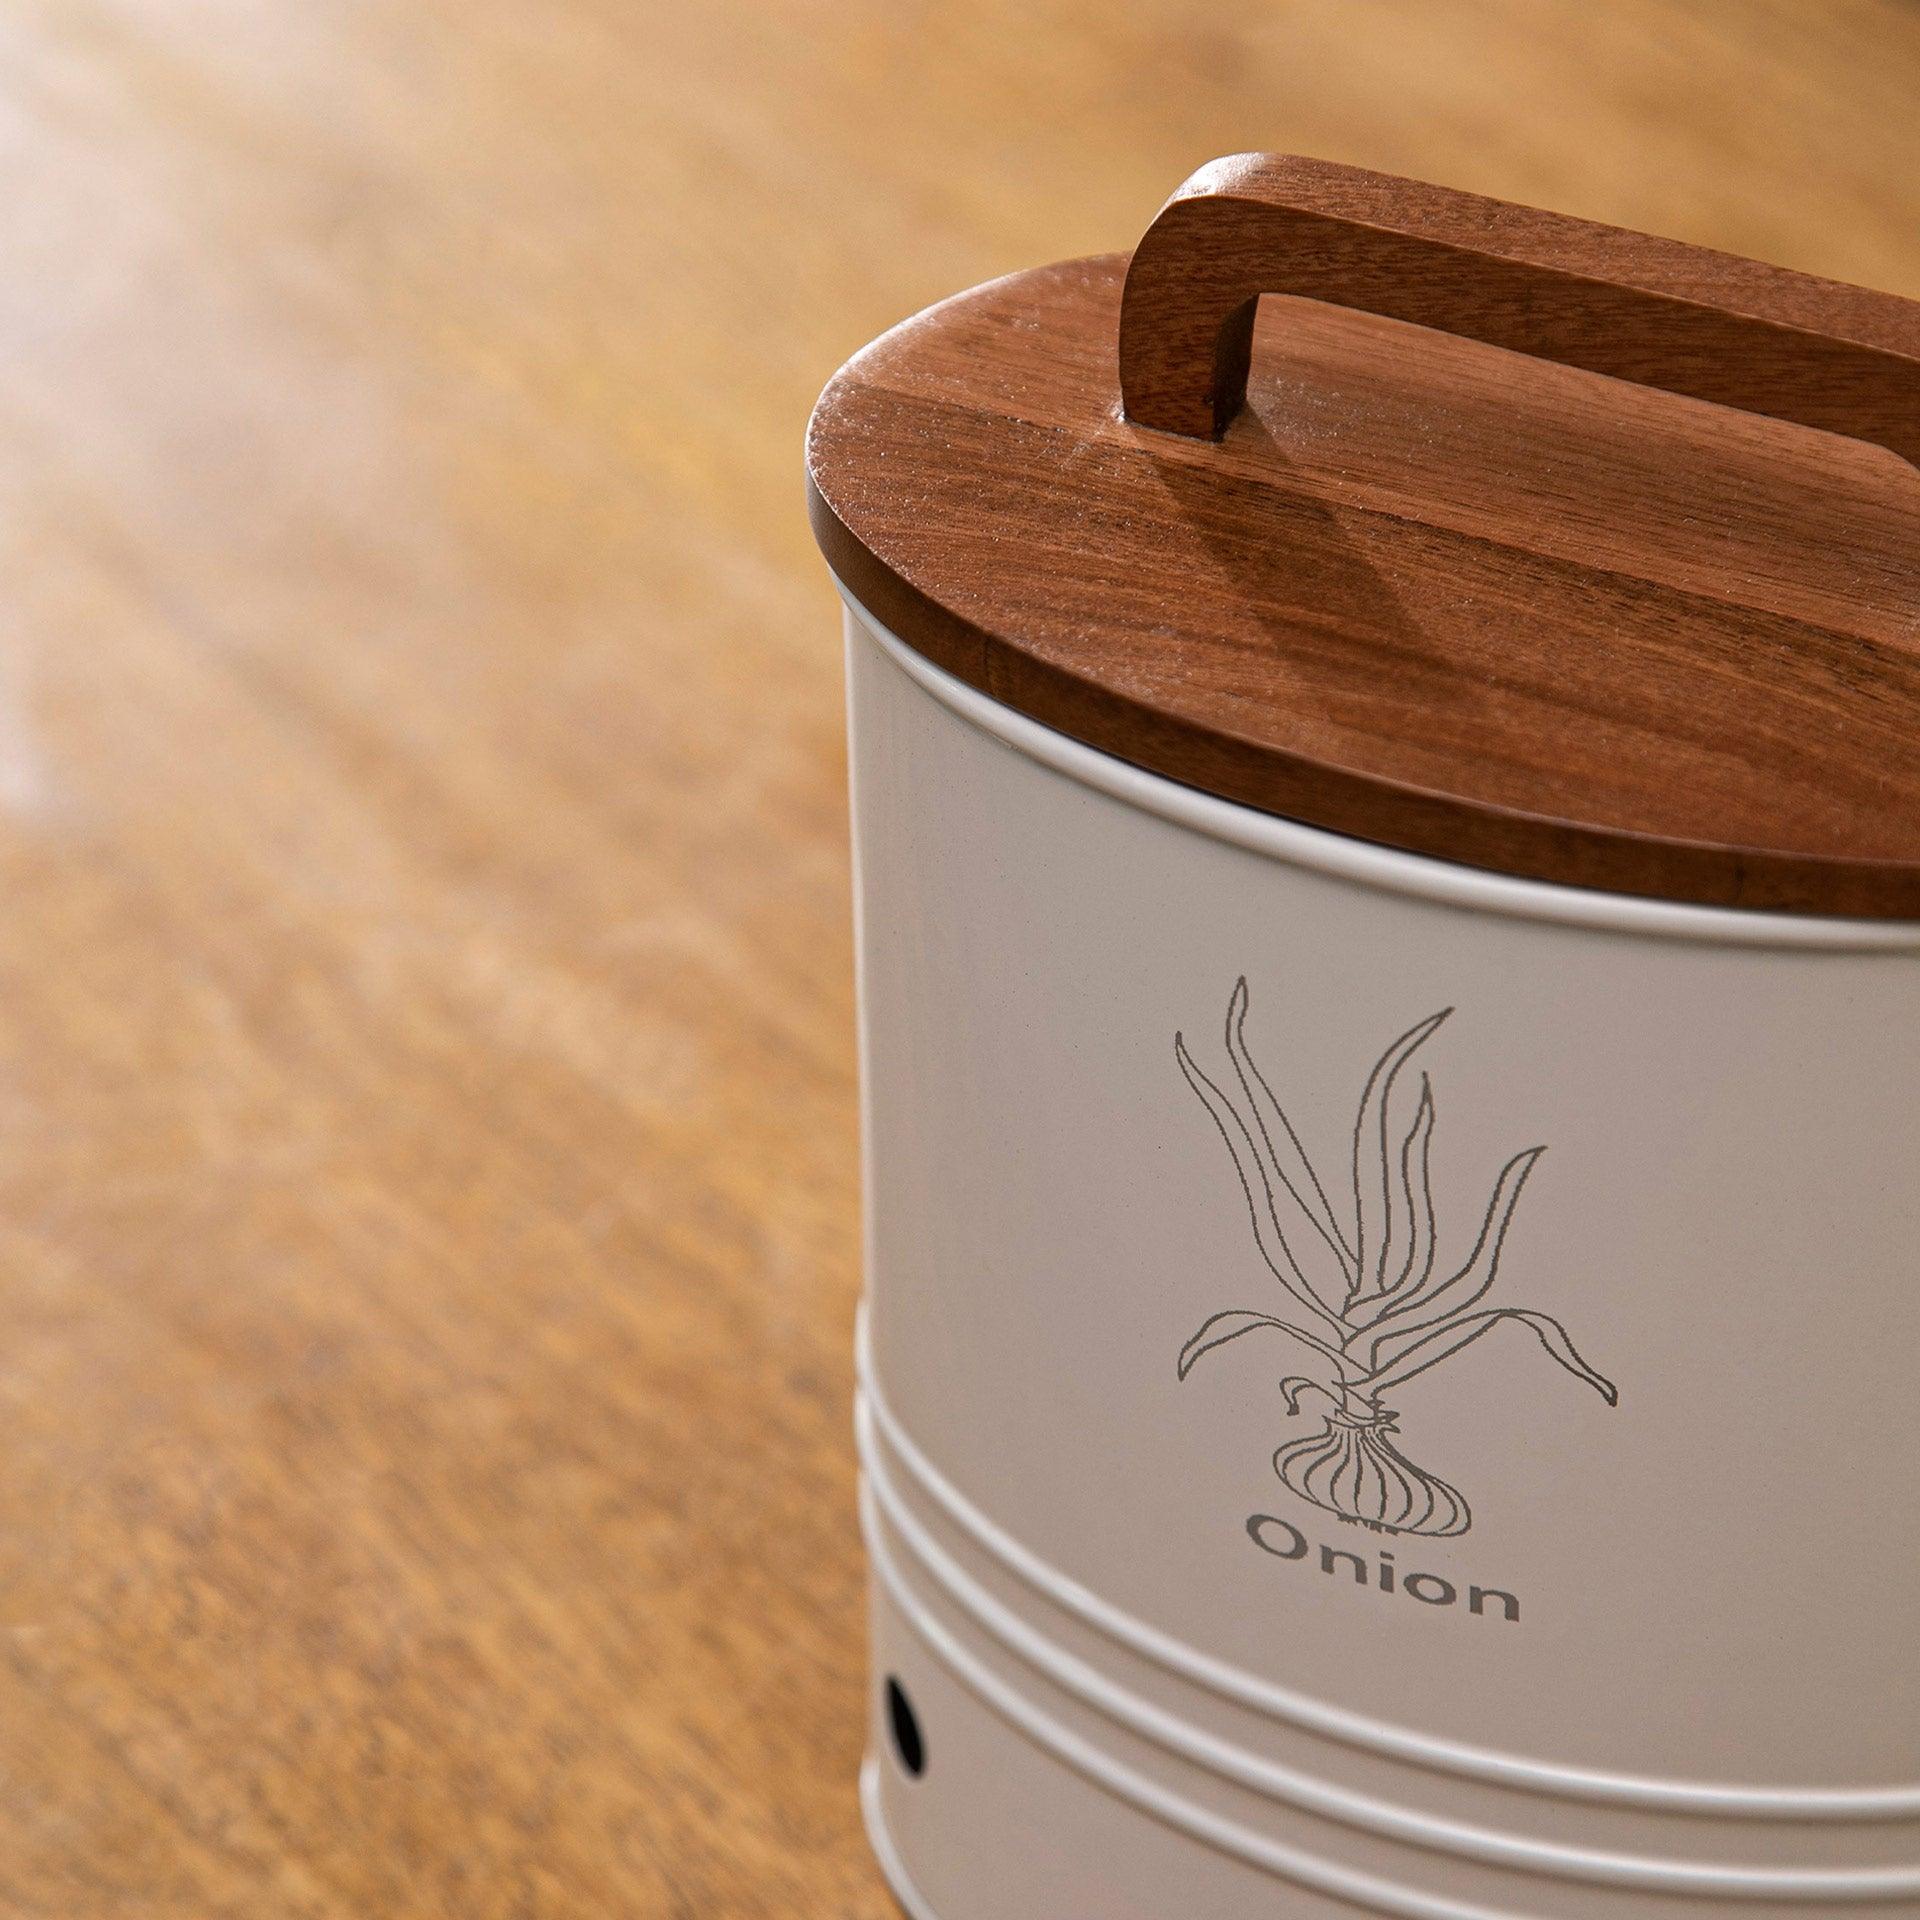 Canny onion storage barrel with wooden lid